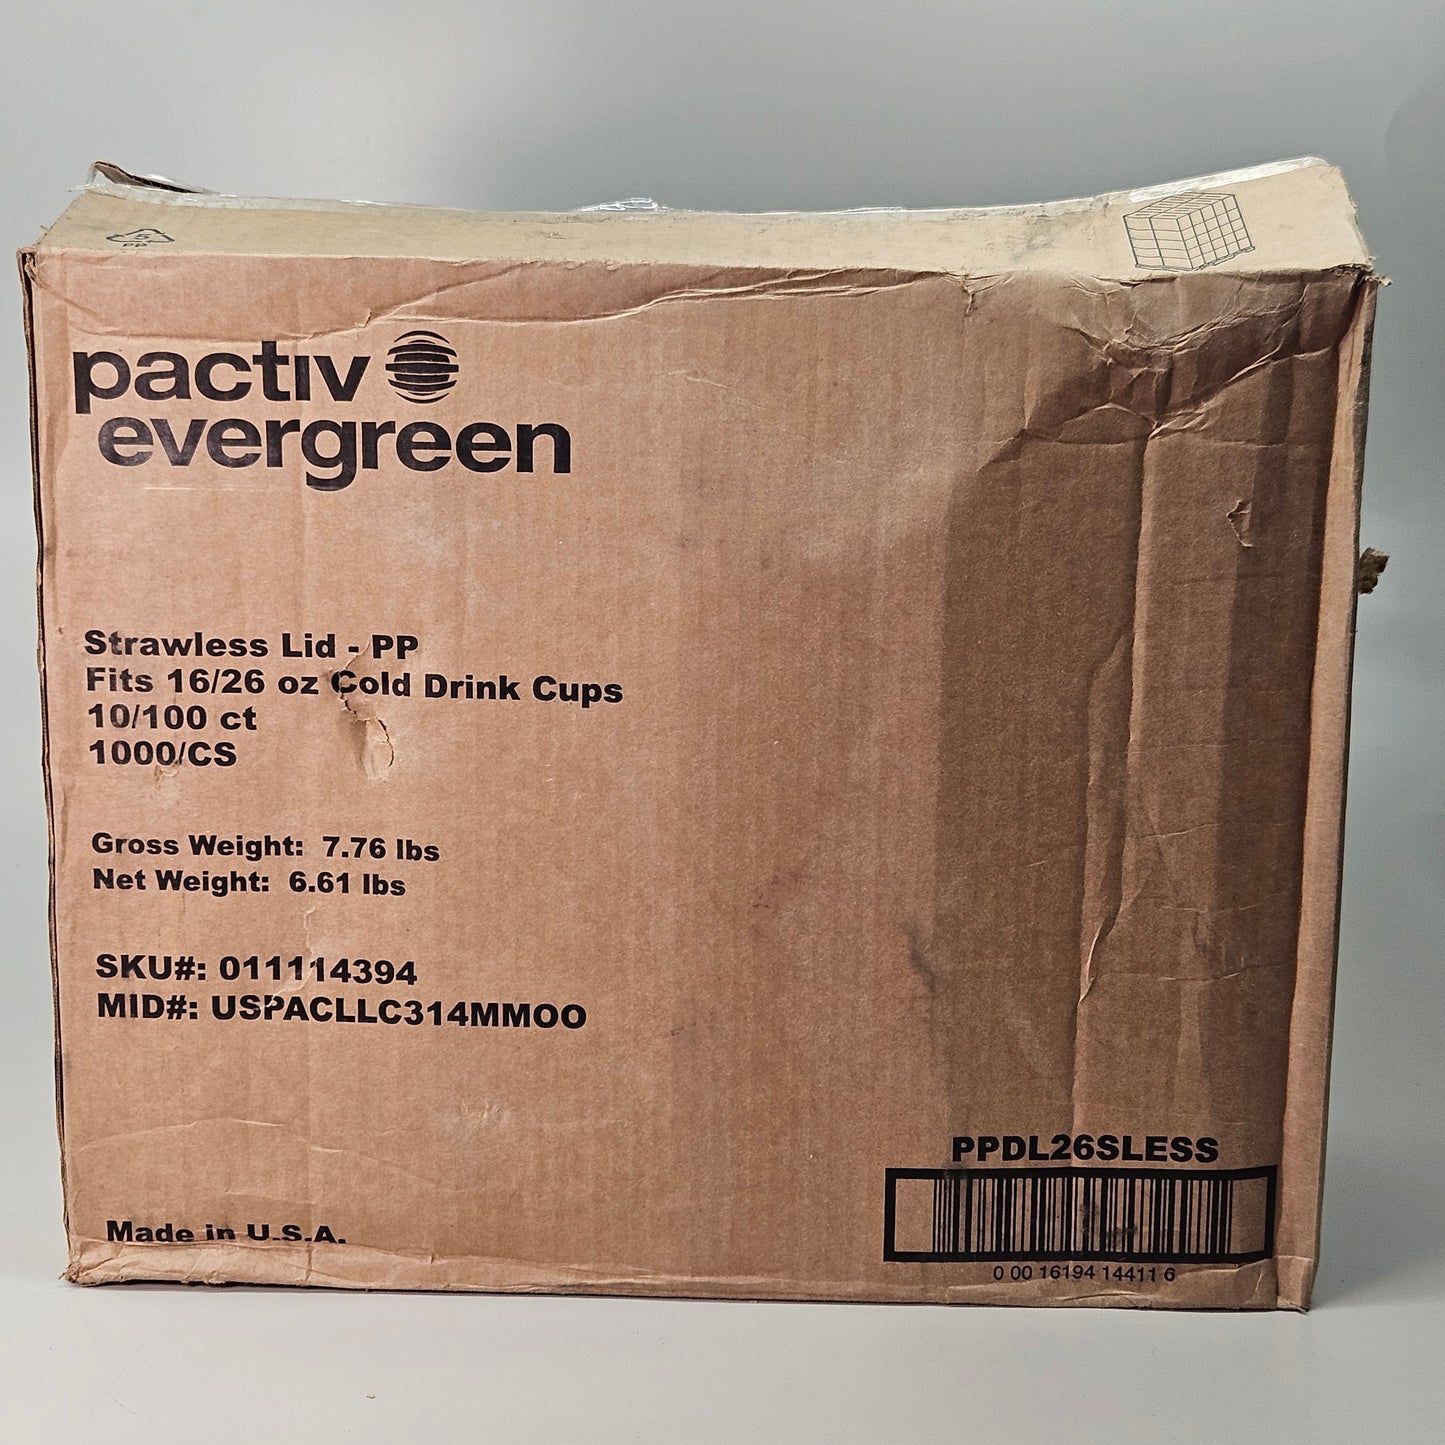 1,000-PK PACTIV EVERGREEN Strawless Lid 16/26 oz Cold Cups (Slightly Damaged Packaging)